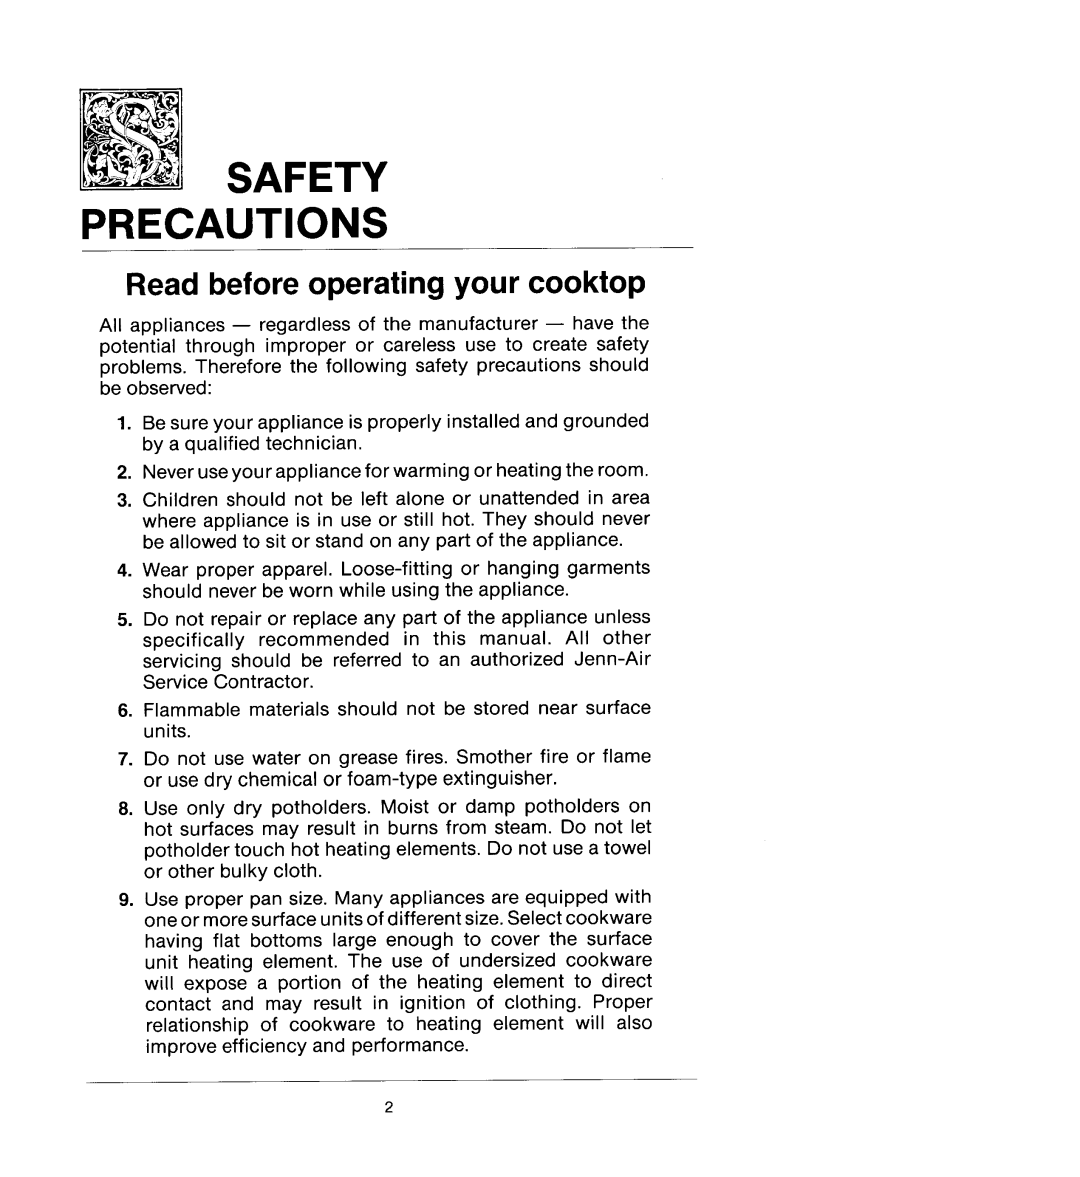 Jenn-Air CCR466B manual Safety Precautions, Read before operating your cooktop 